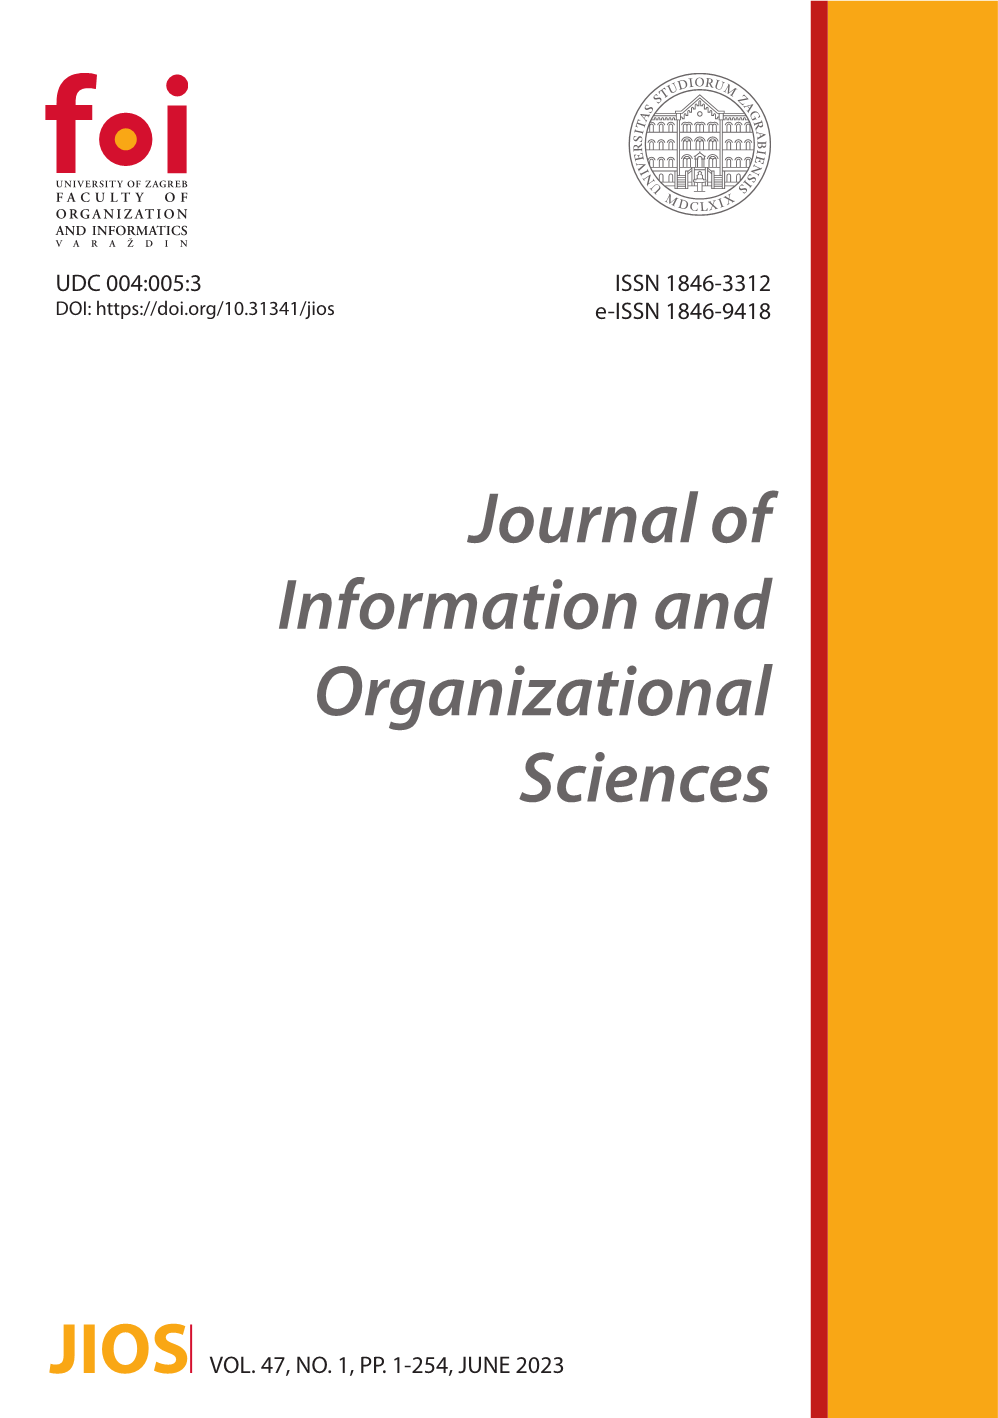 Towards Detecting Influential Members and Critical Topics from Dark Web Forums: A Data Mining Approach